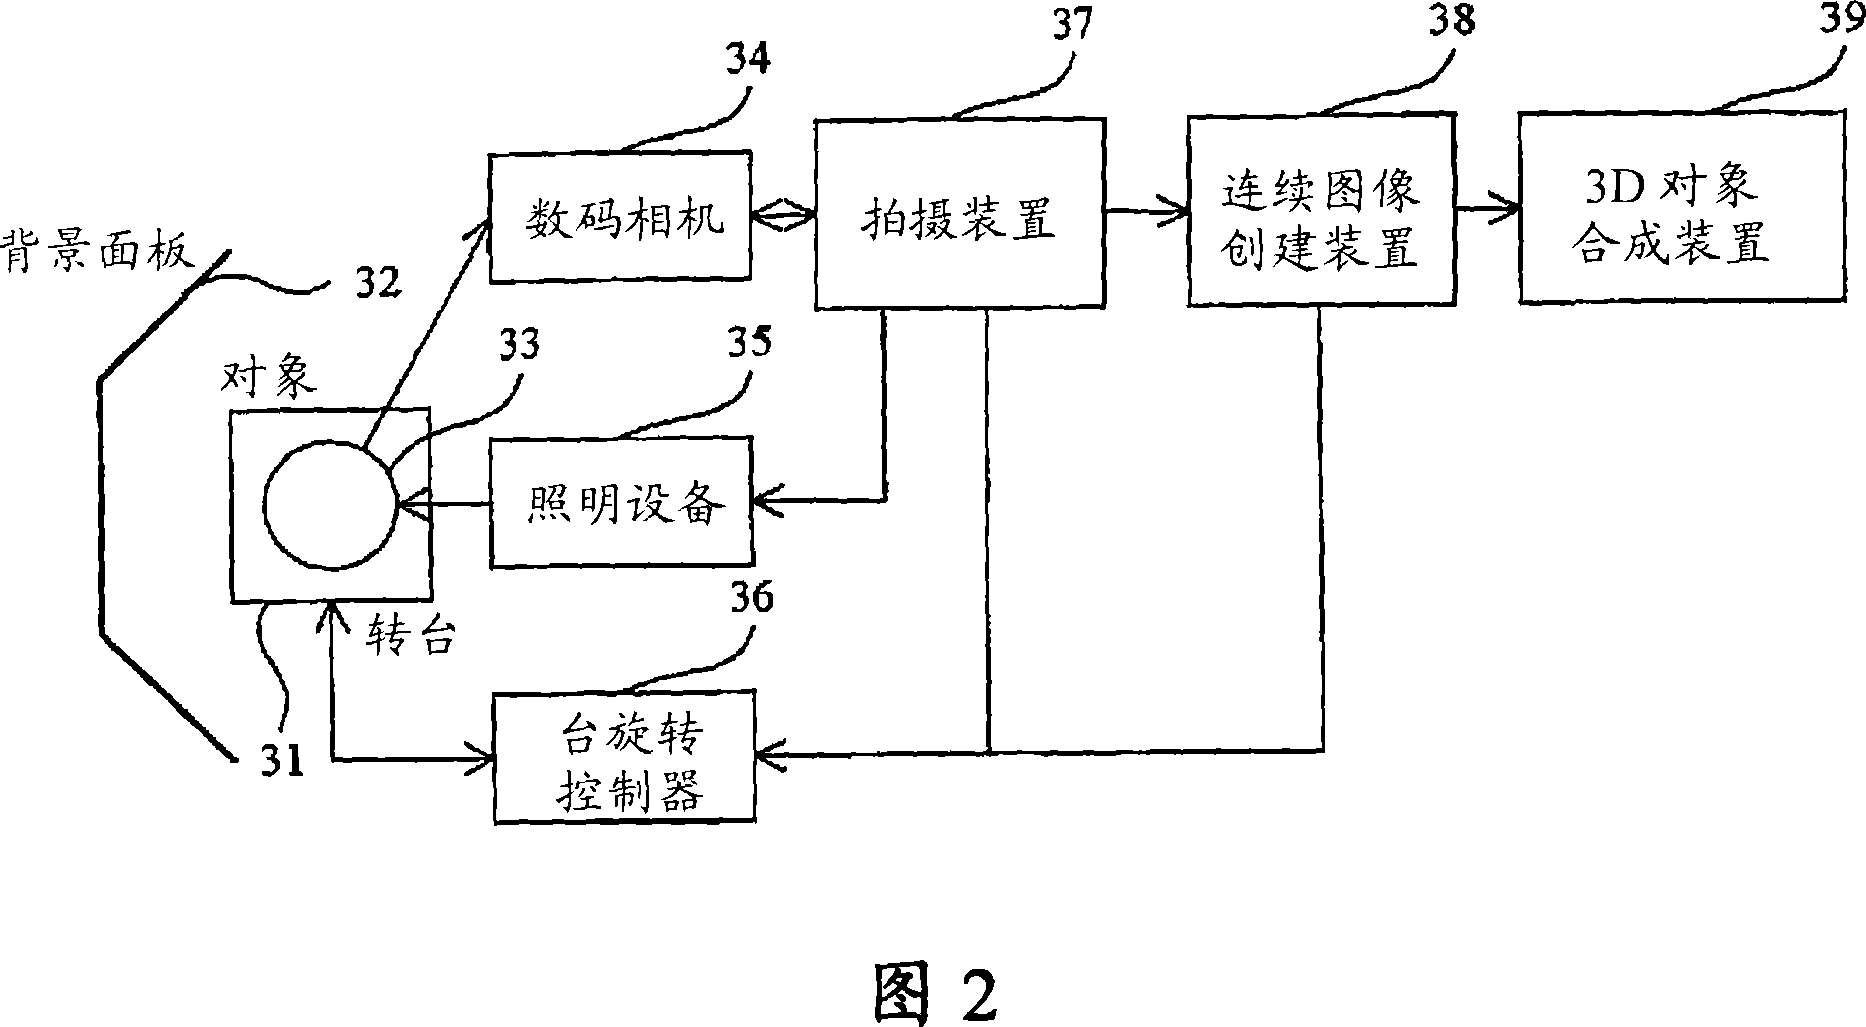 3D image forming and displaying system